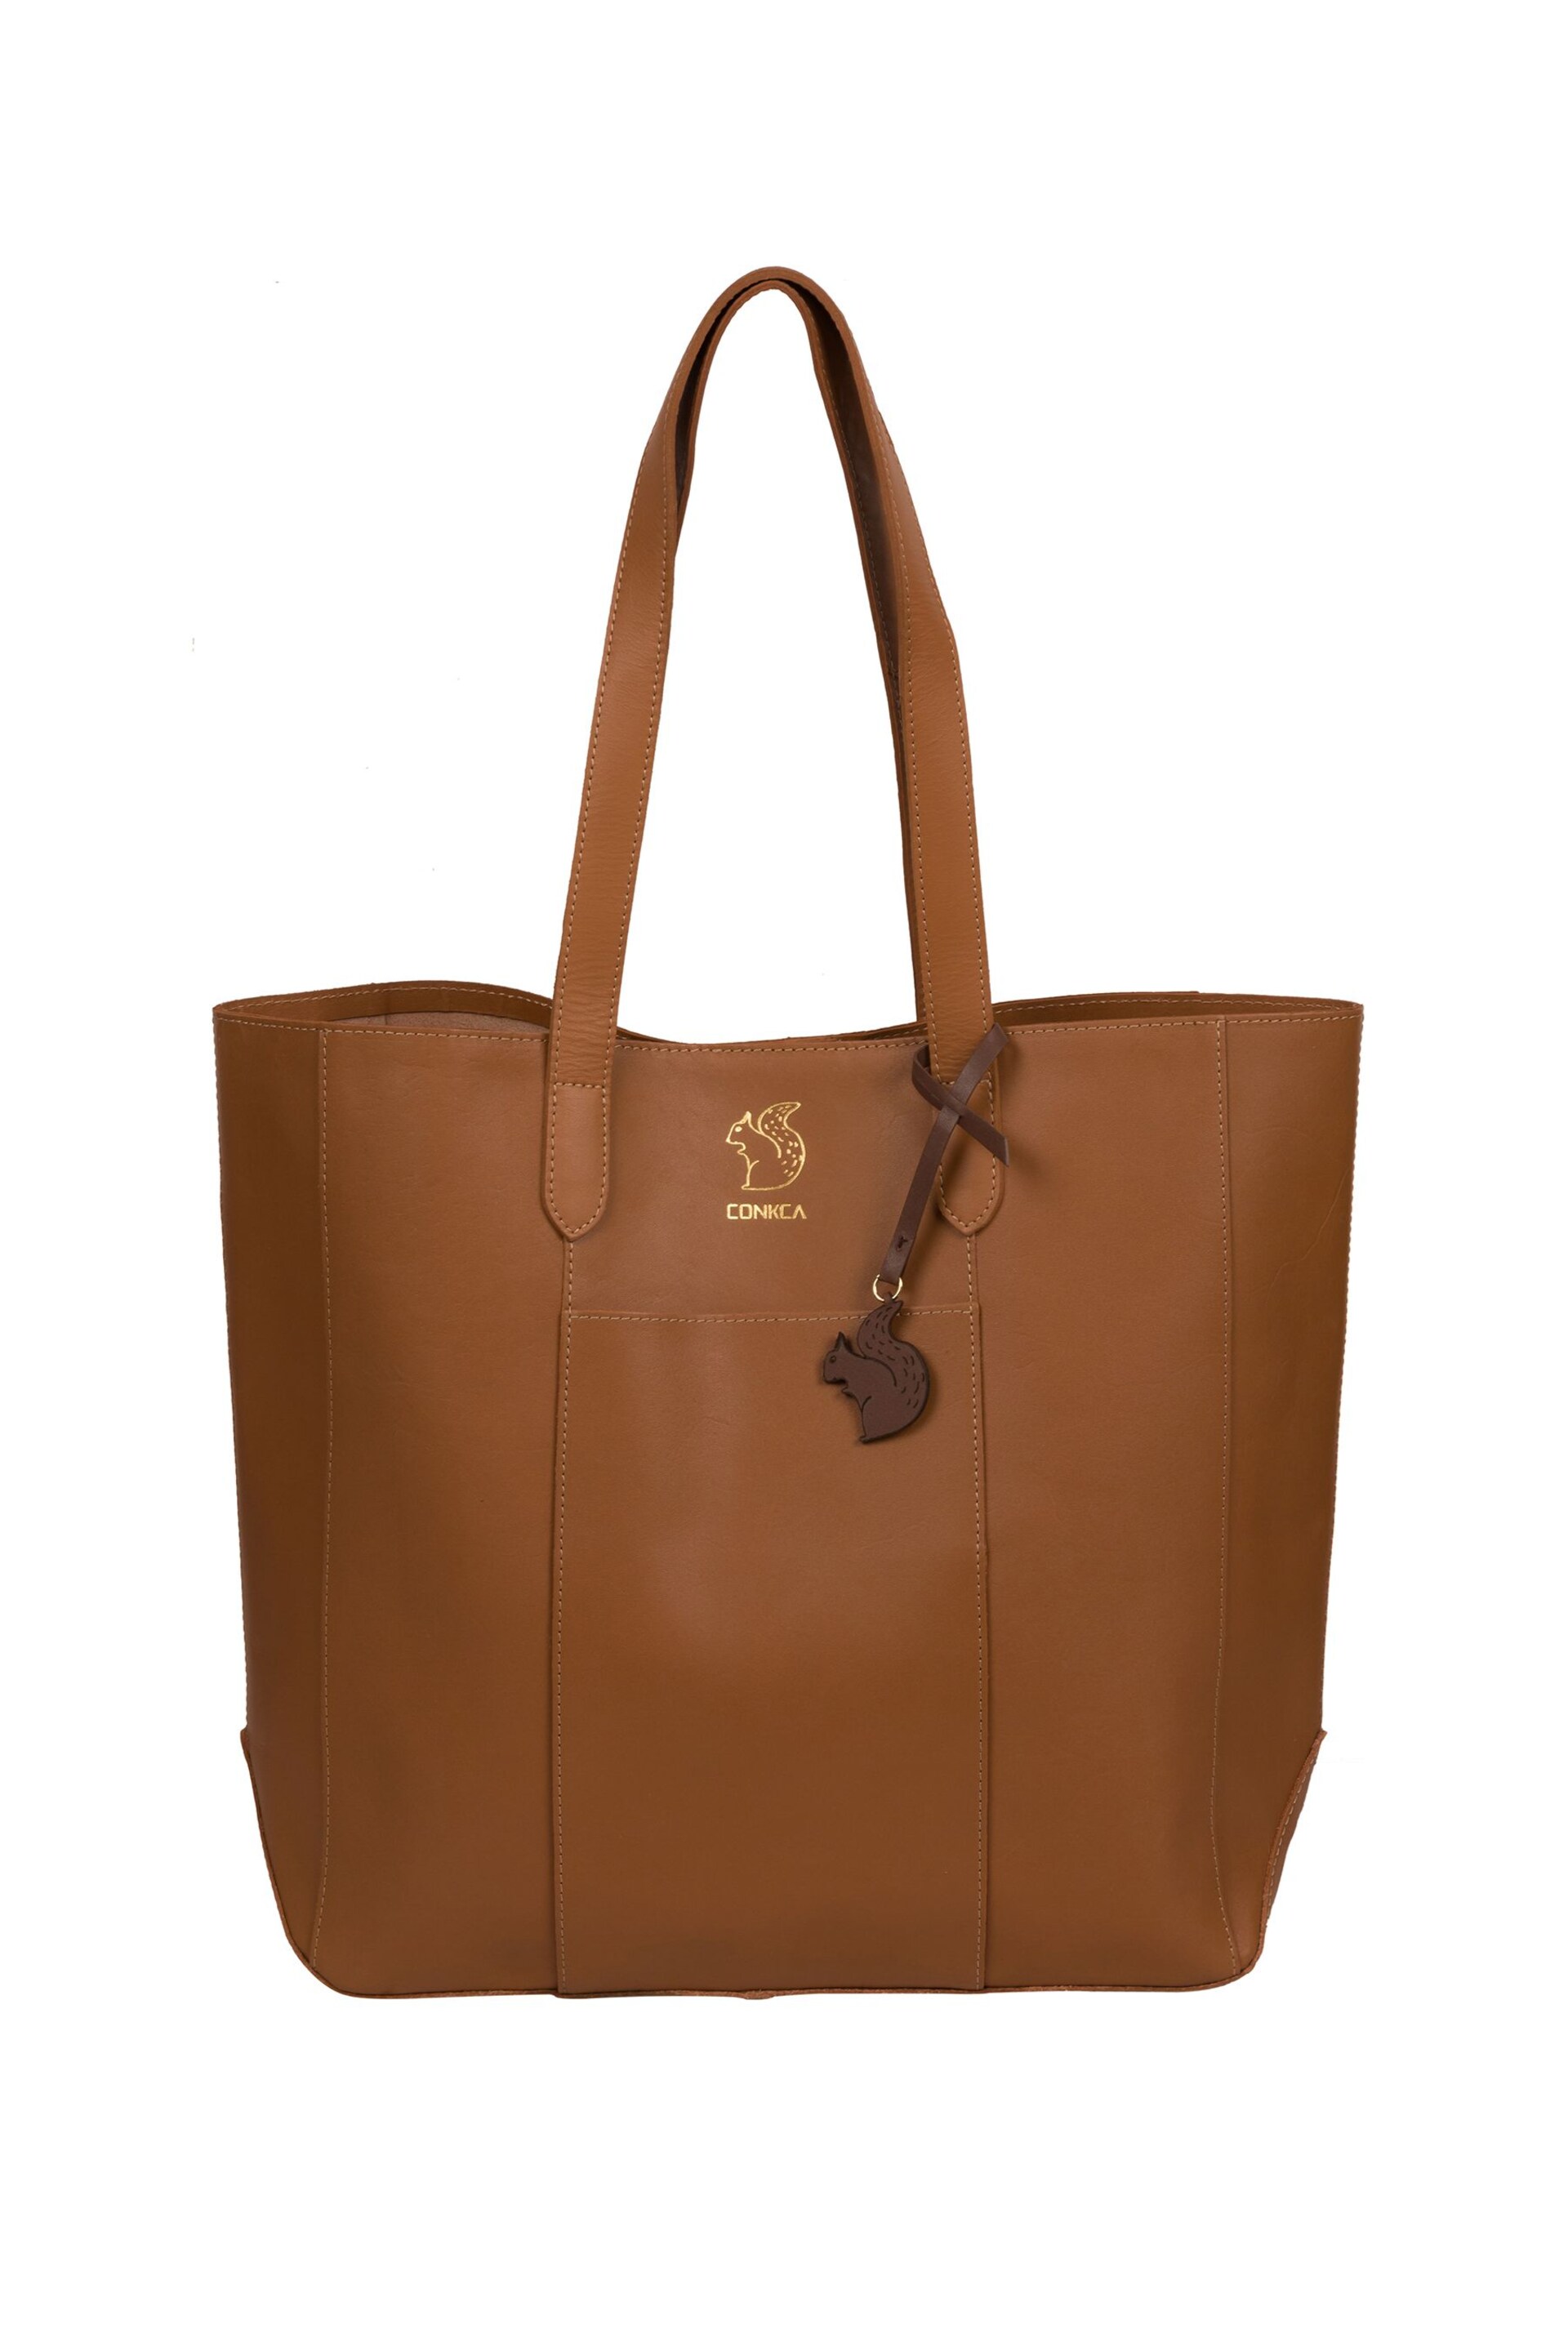 Conkca Hardy Vegetable-Tanned Leather Shopper Bag - Image 2 of 5